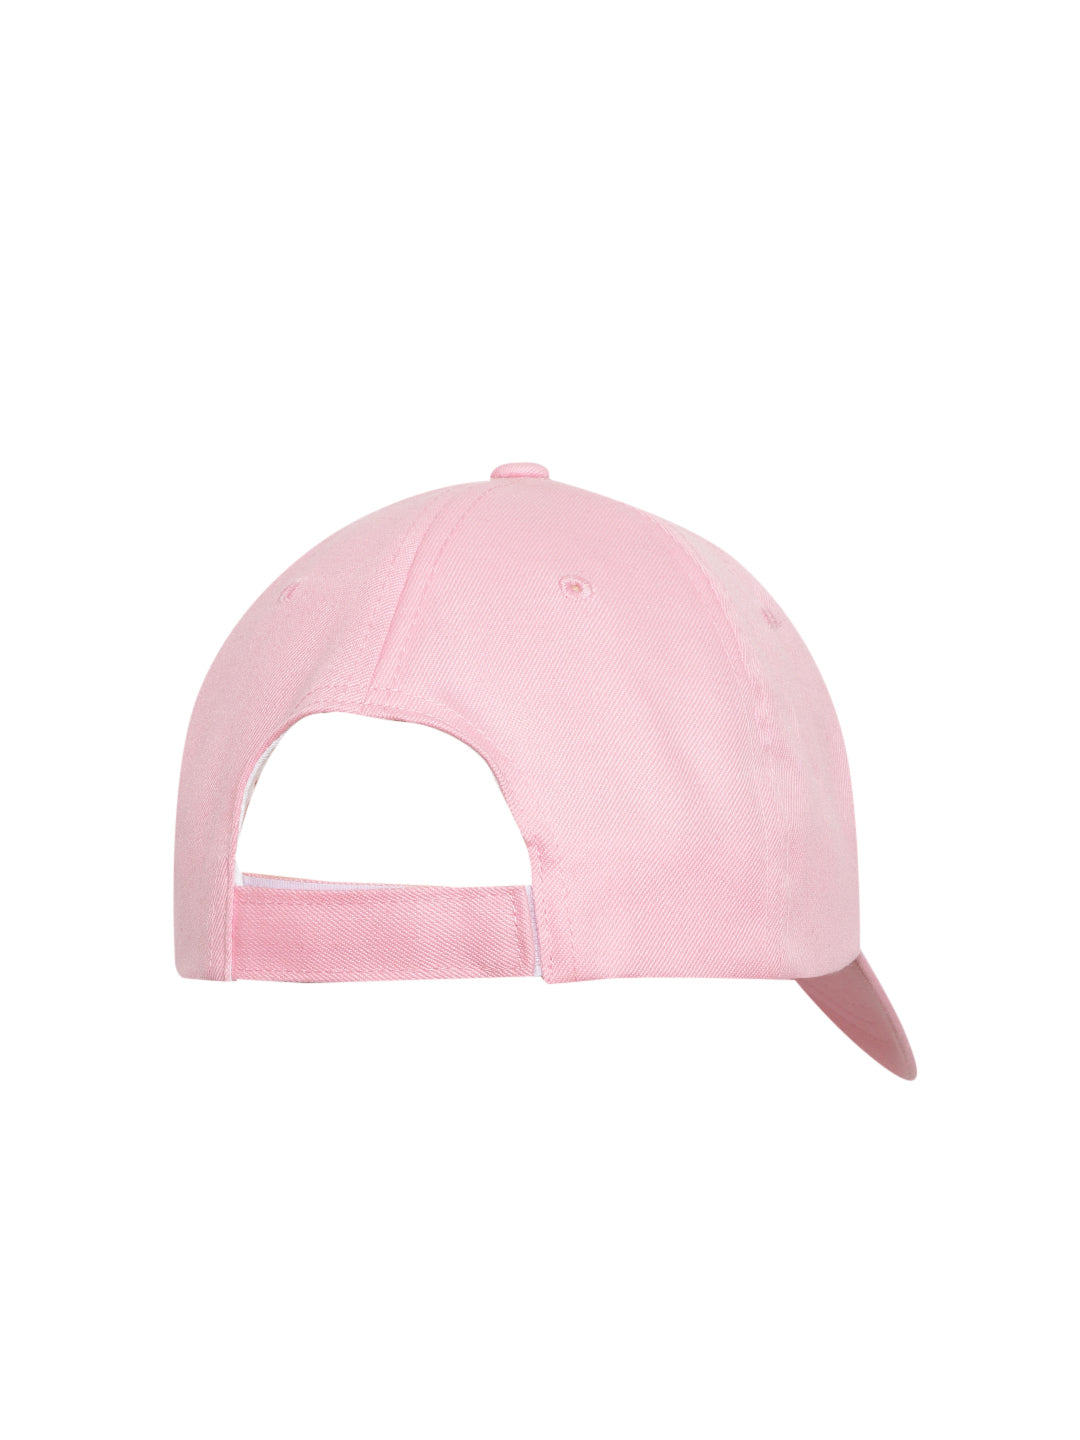 Blueberry pink IYKYK embroidered baseball cap